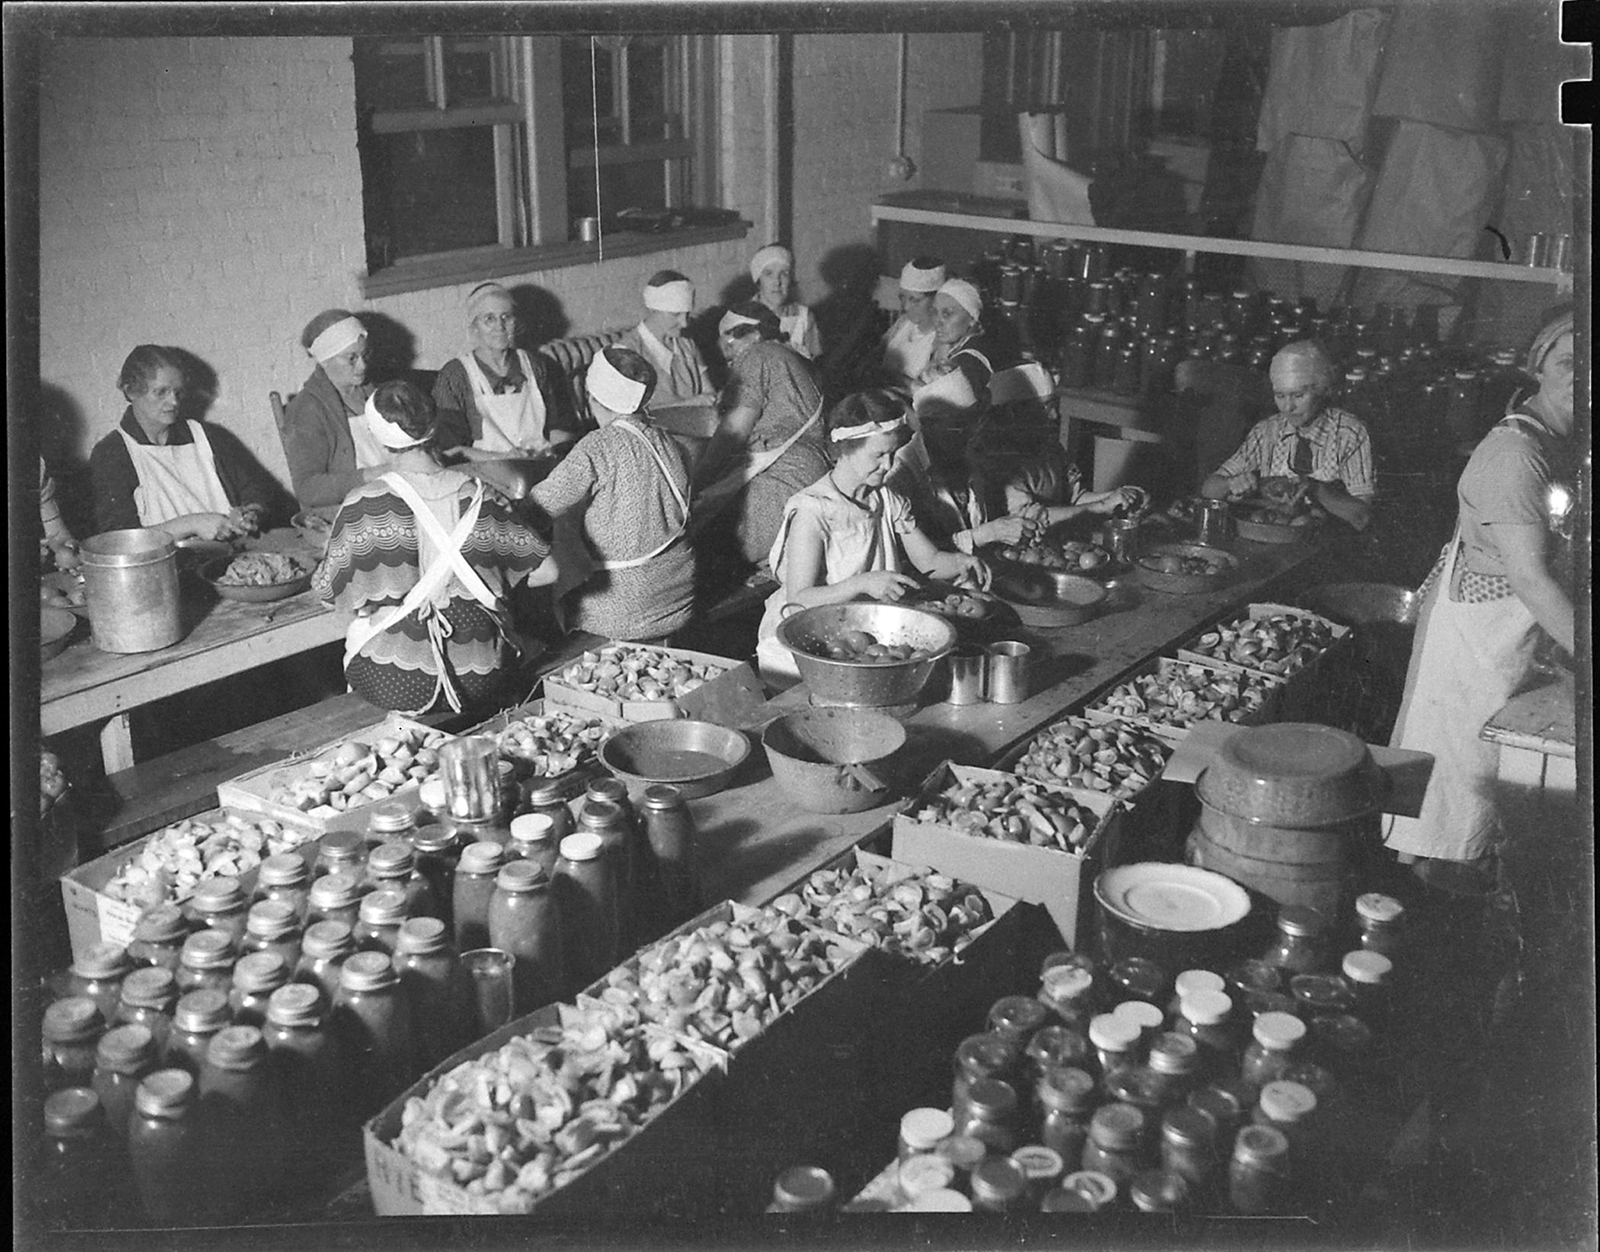 Women with a Mormon charity group prepare foods in Sept. 1937. Photo by Hansel Mieth/The LIFE Picture Collection/Shutterstock